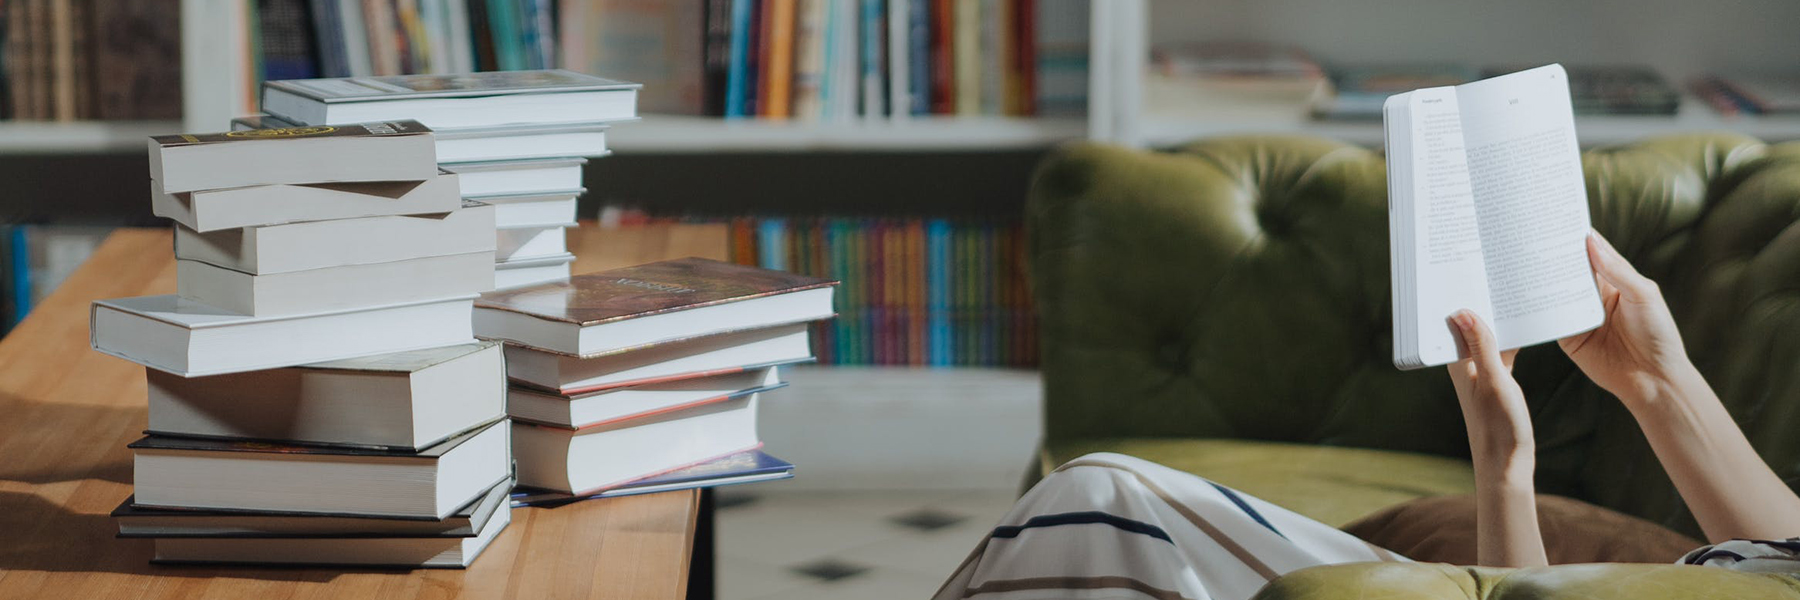 person reading a book on couch with pile of books nearby BANNER